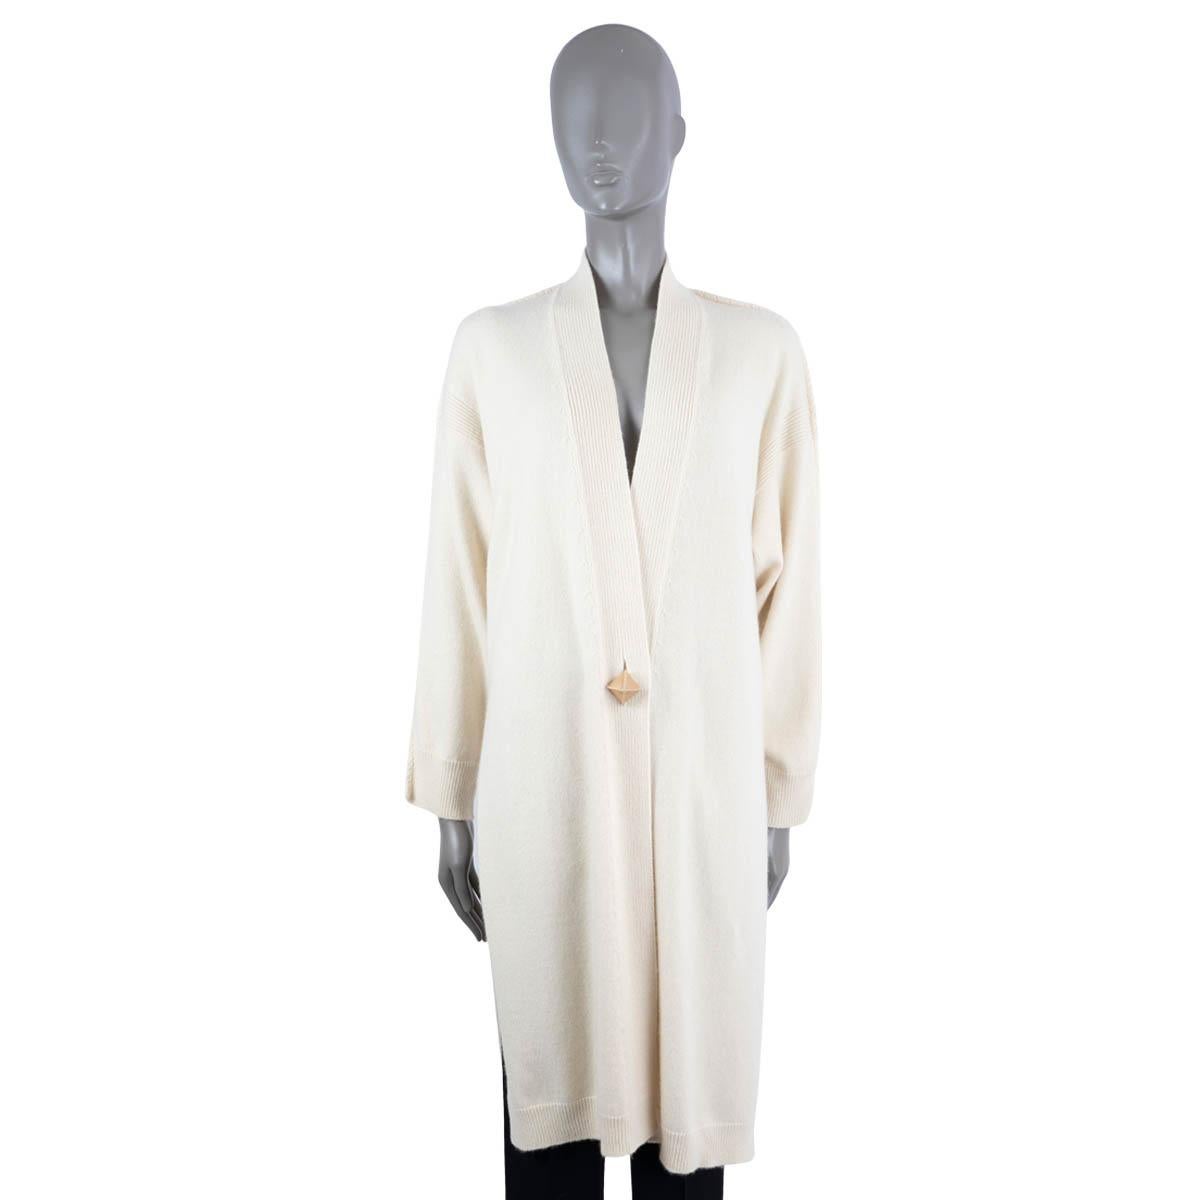 HERMES ivory cashmere PYRAMID BUTTON LONG KNIT Coat Jacket 34 XS In Excellent Condition For Sale In Zürich, CH